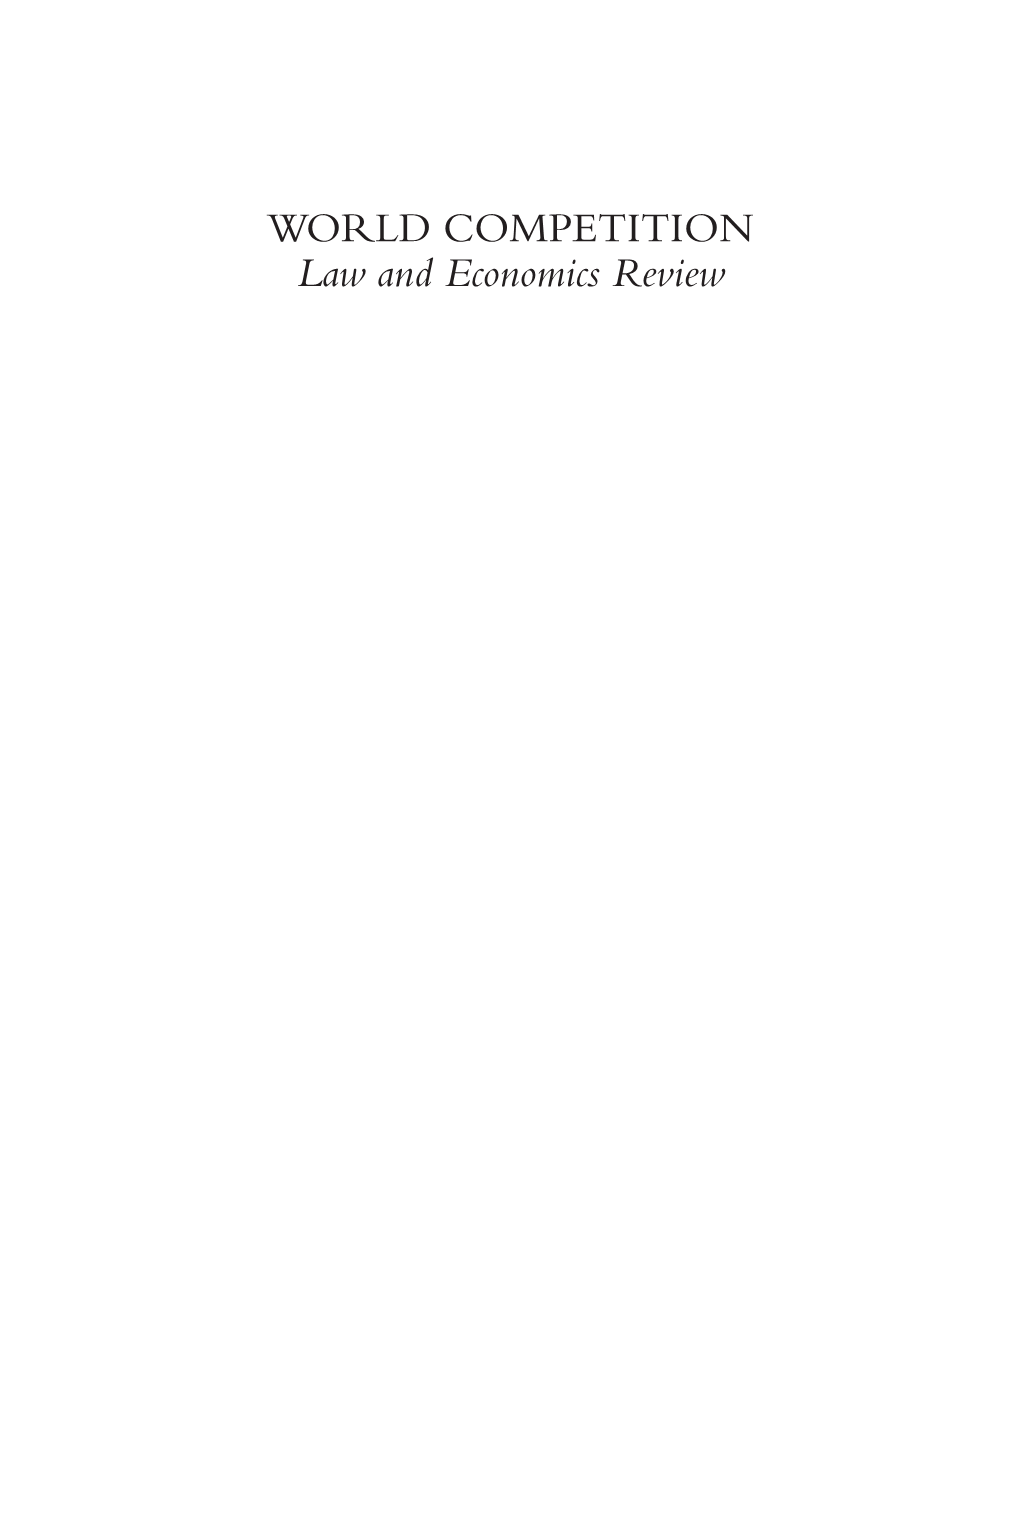 WORLD COMPETITION Law and Economics Review Published By: Kluwer Law International B.V